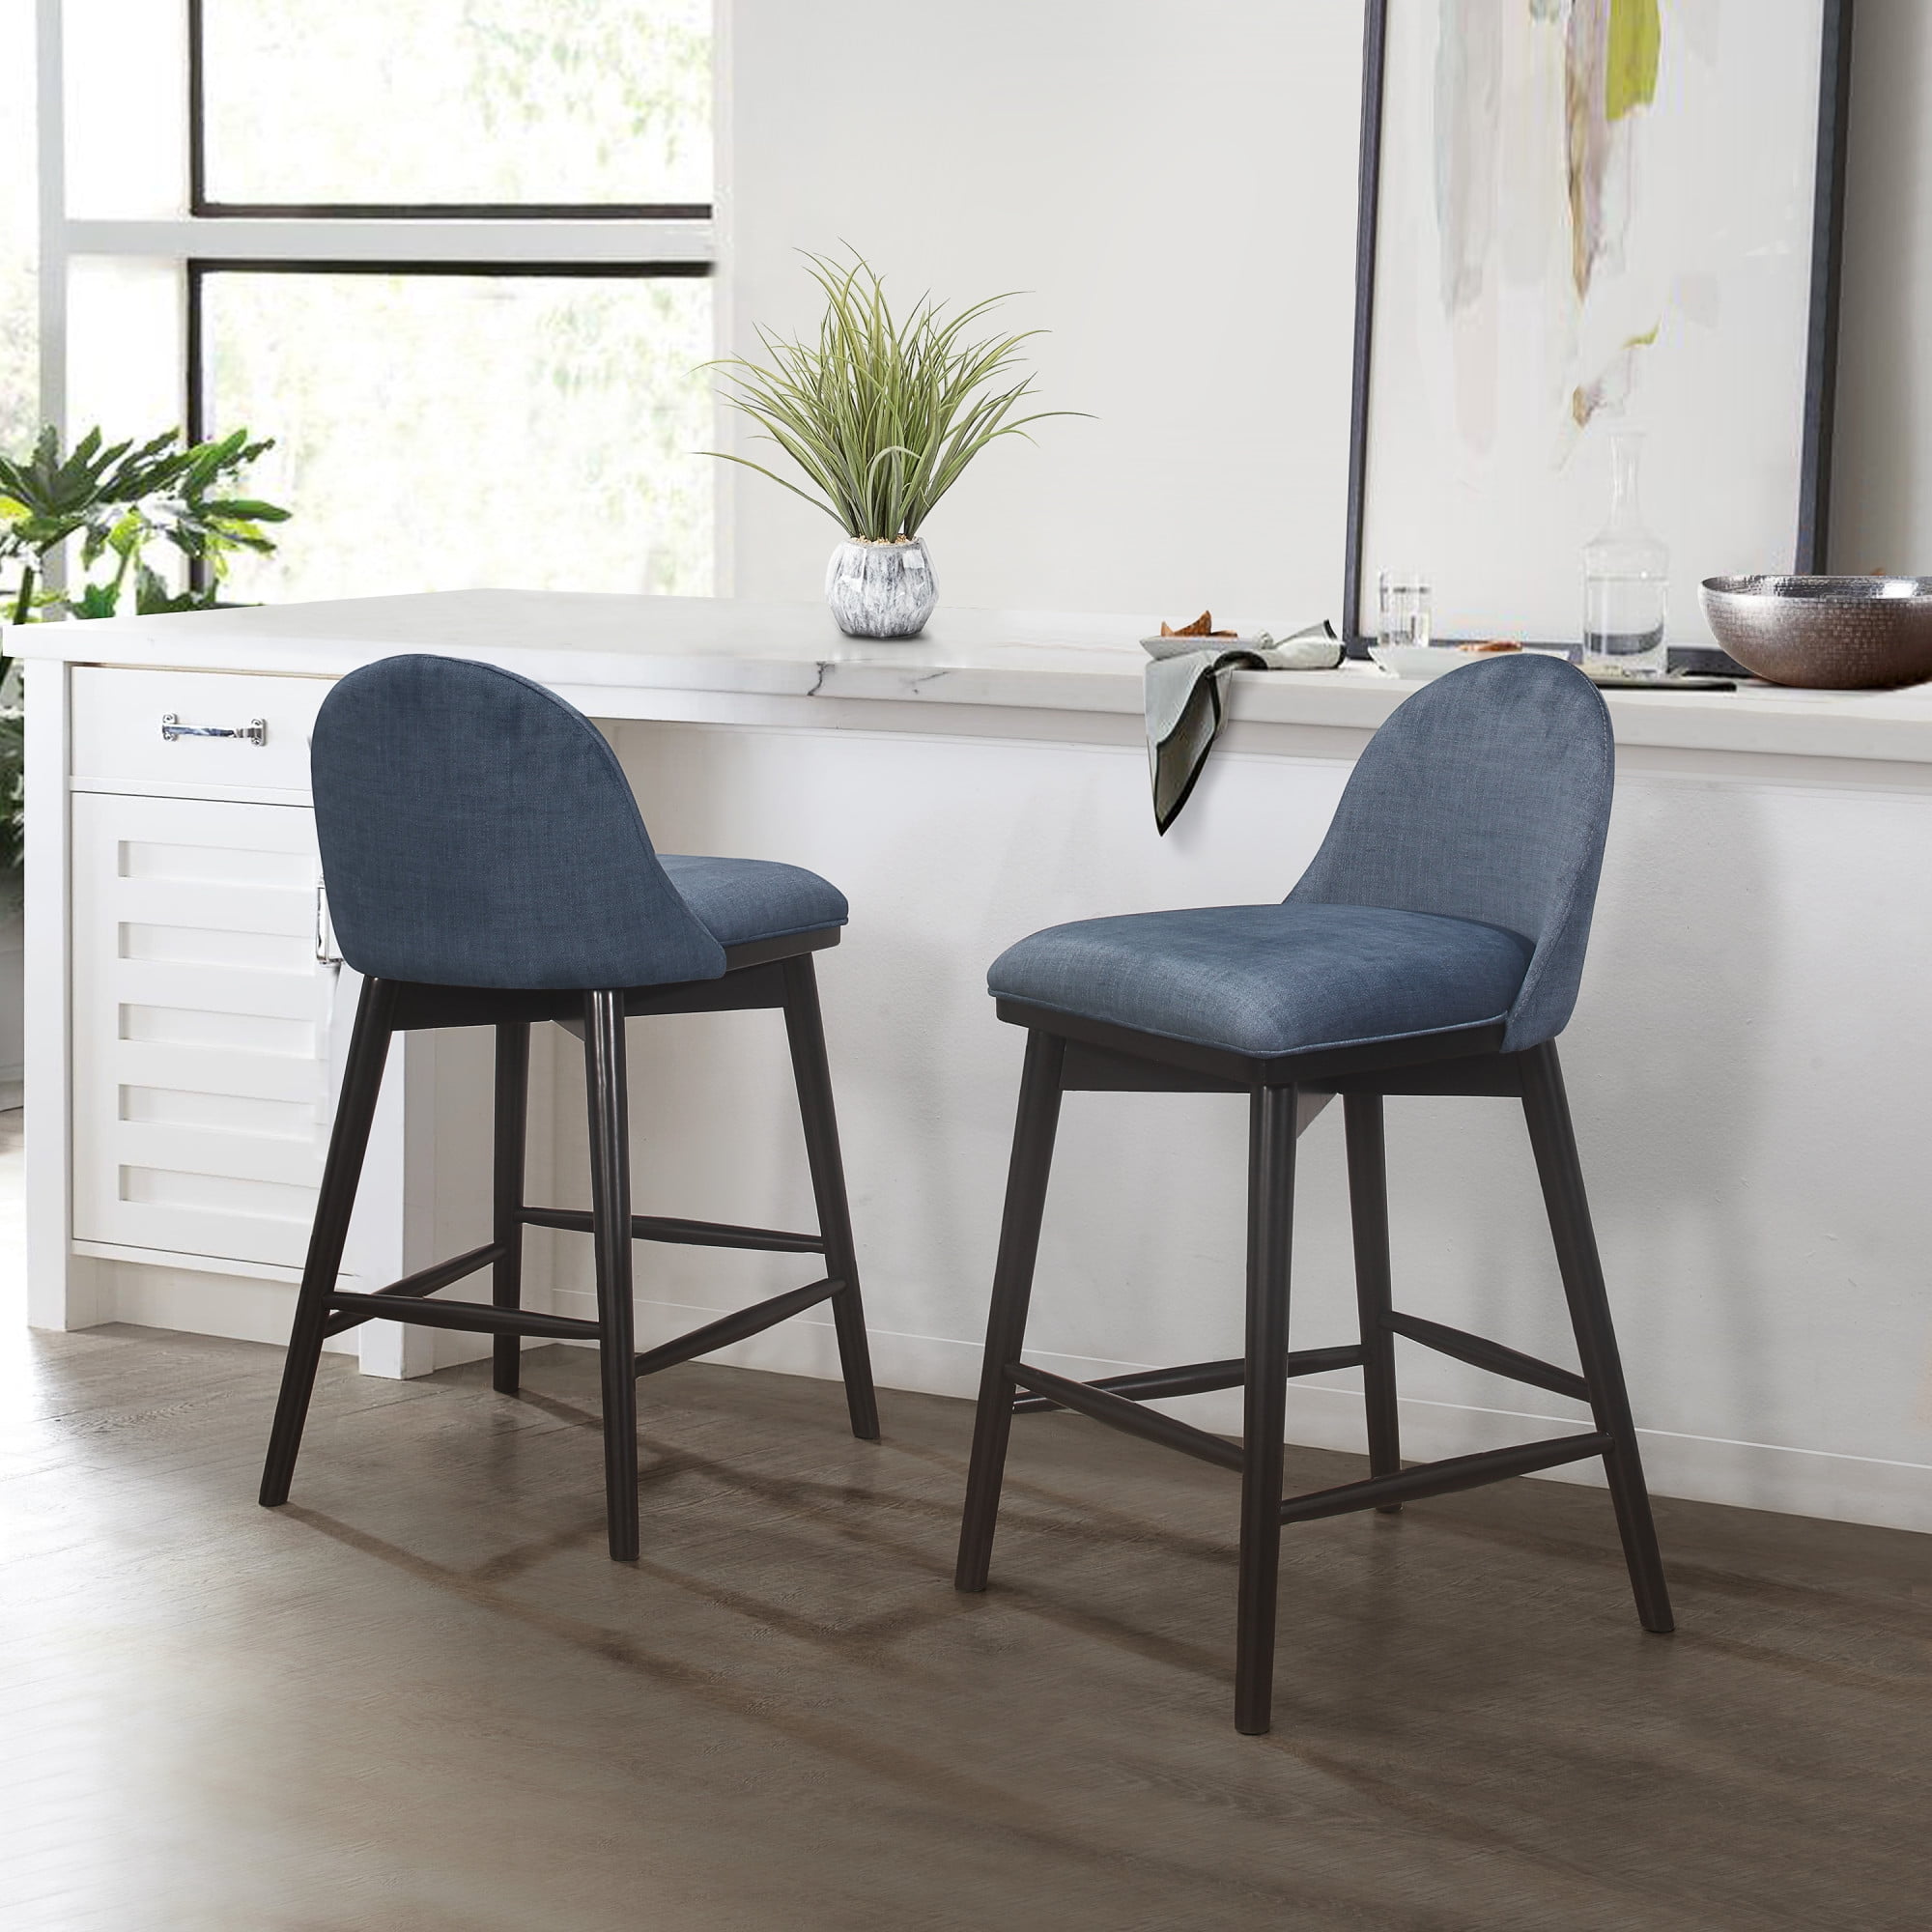 Hilale Furniture St Claire, Wood Counter Height Stools Canada